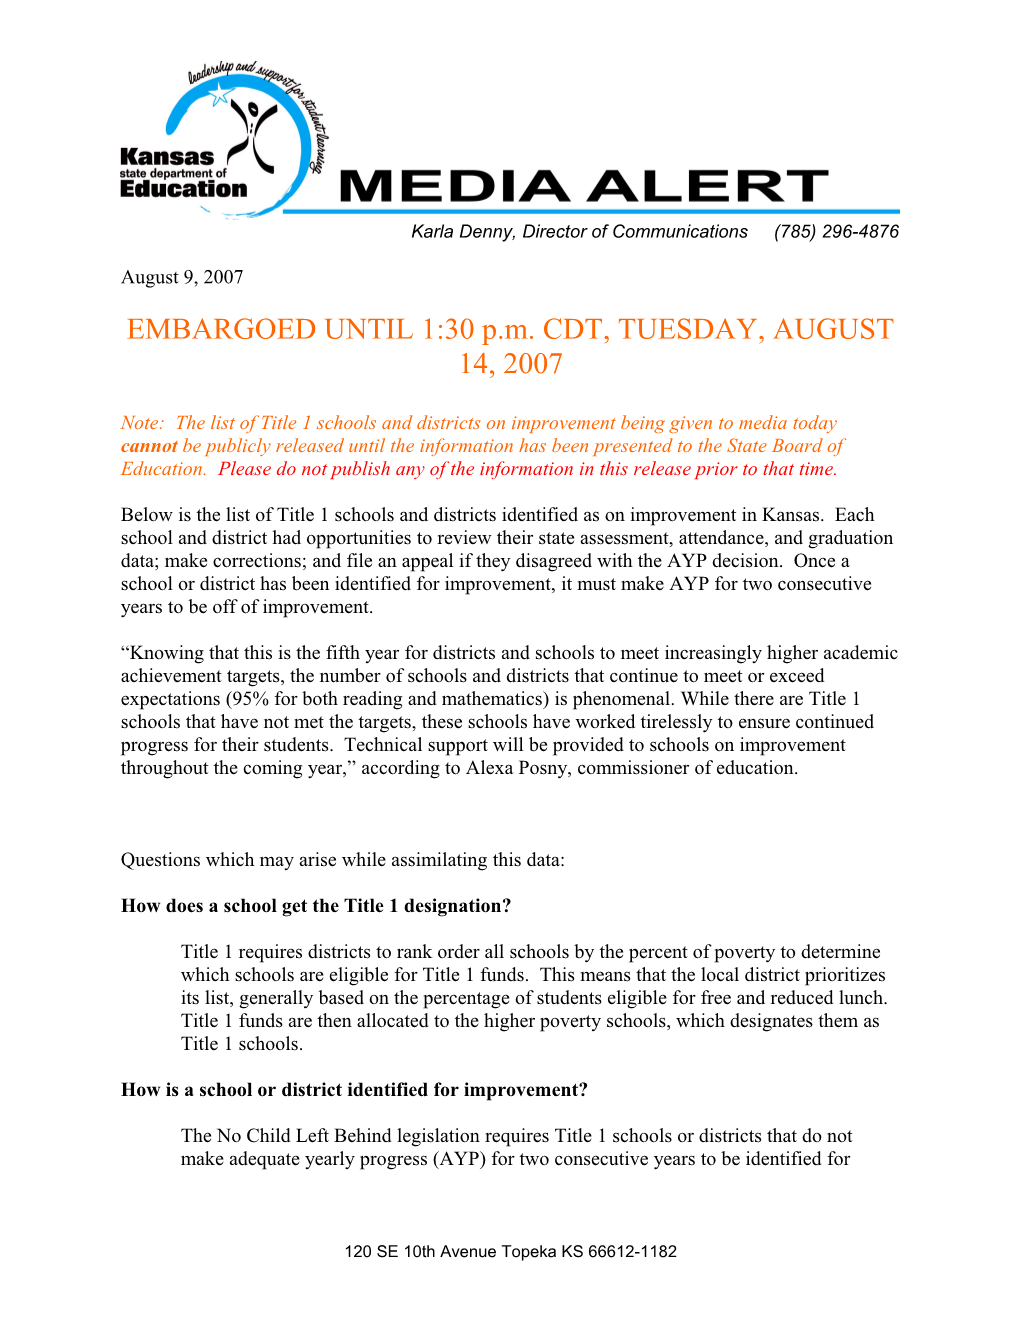 EMBARGOED UNTIL 1:30 P.M. CDT, TUESDAY, AUGUST 14, 2007